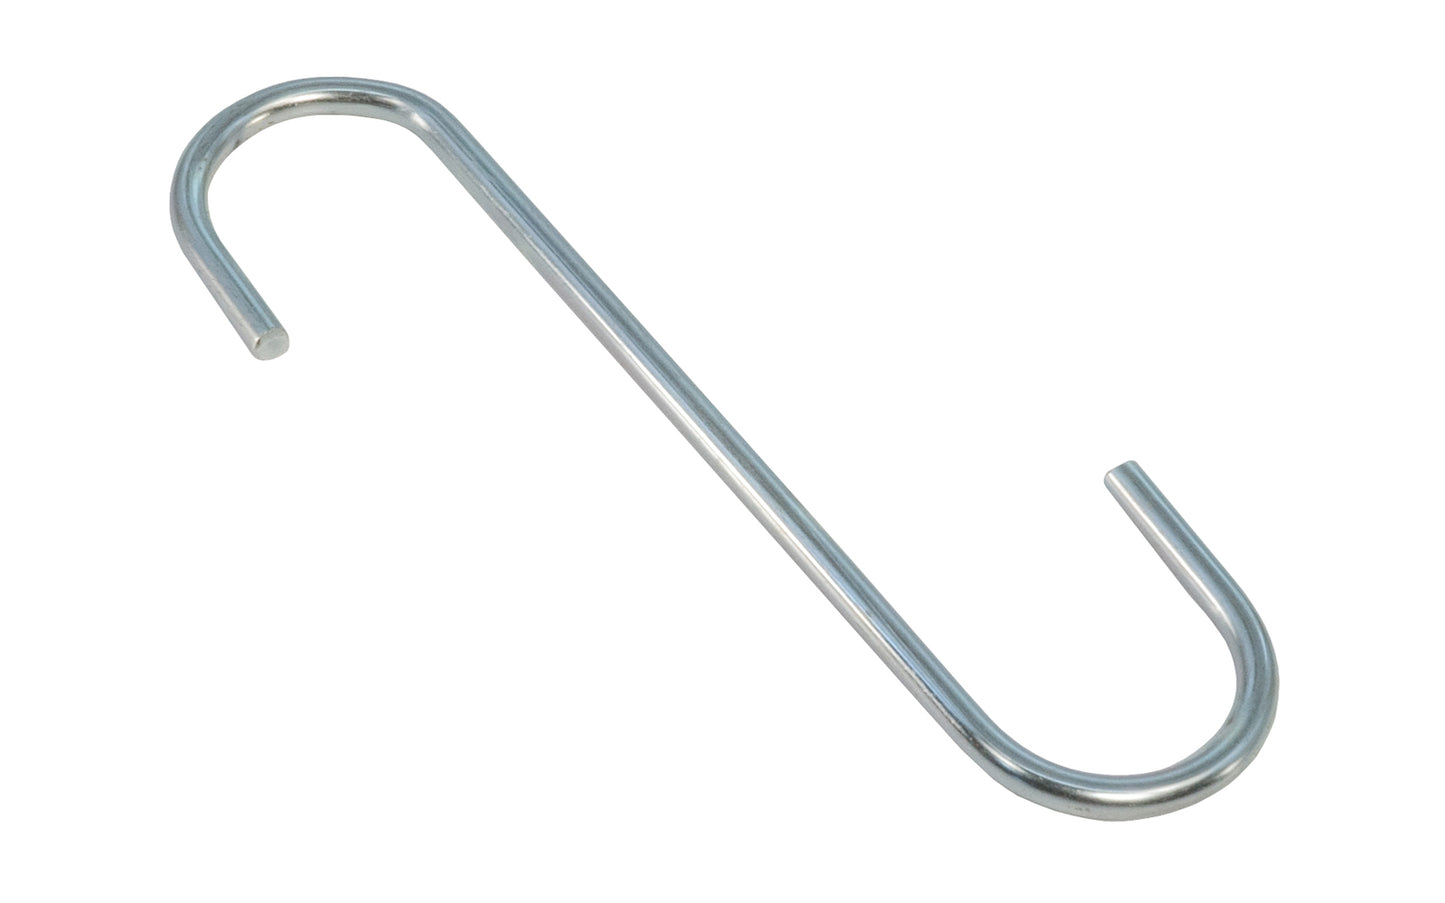 Large 5-1/2" overall length S Hook. Made of zinc plated steel material. 1-1/4" inside opening. Open S Hook. Large 5-1/2" Zinc Plated S-Hook